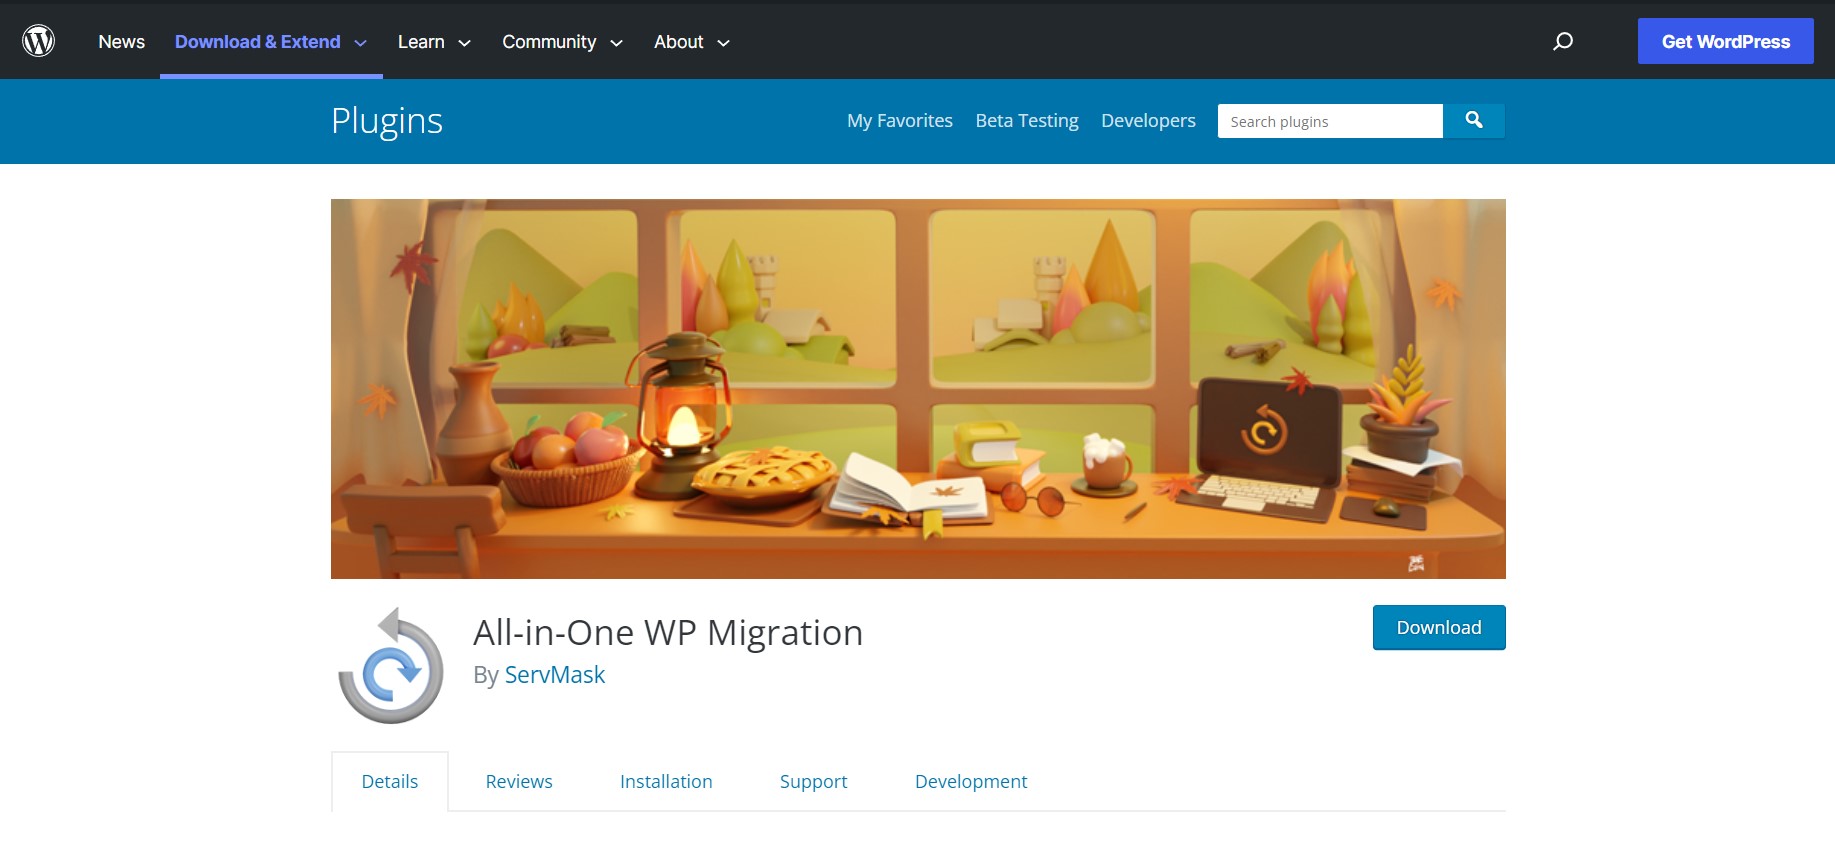 All in one wp migration wordpress backup plugin